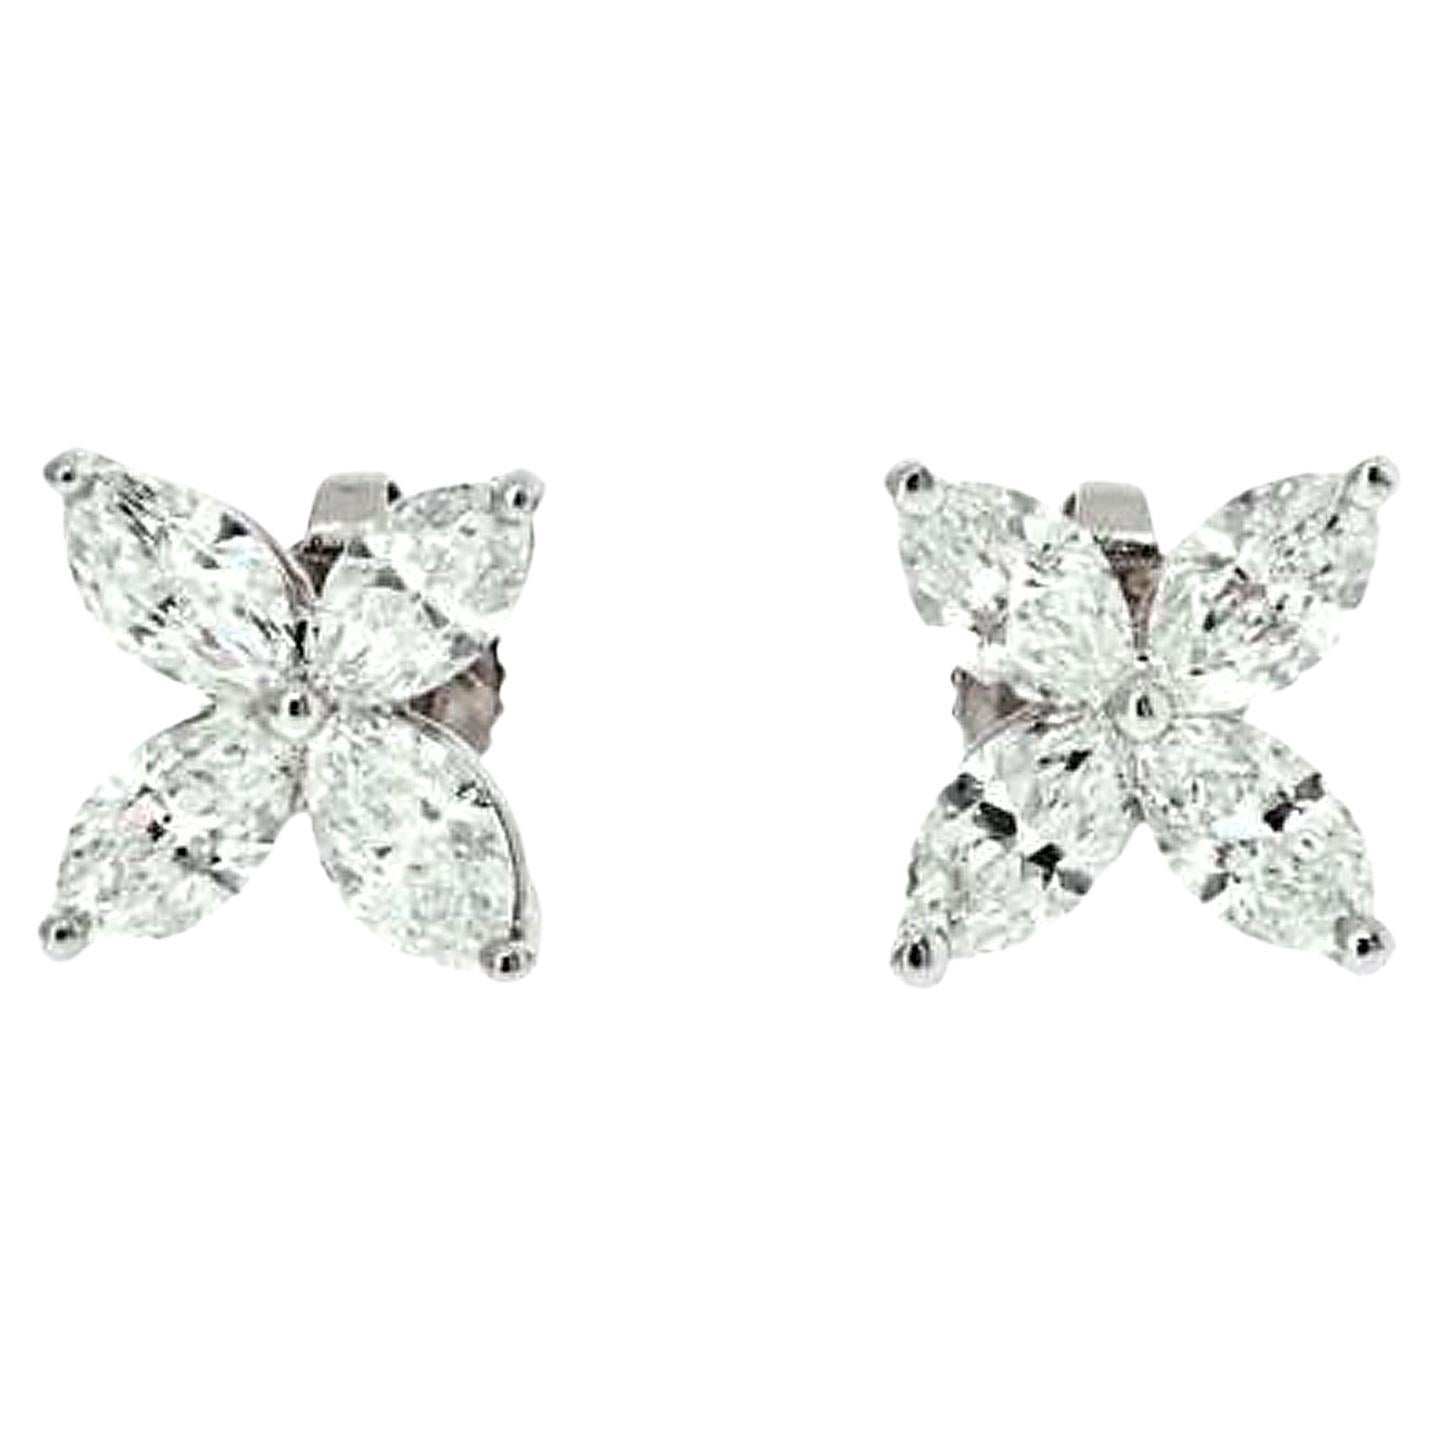 Tiffany and Co. Victoria Earrings